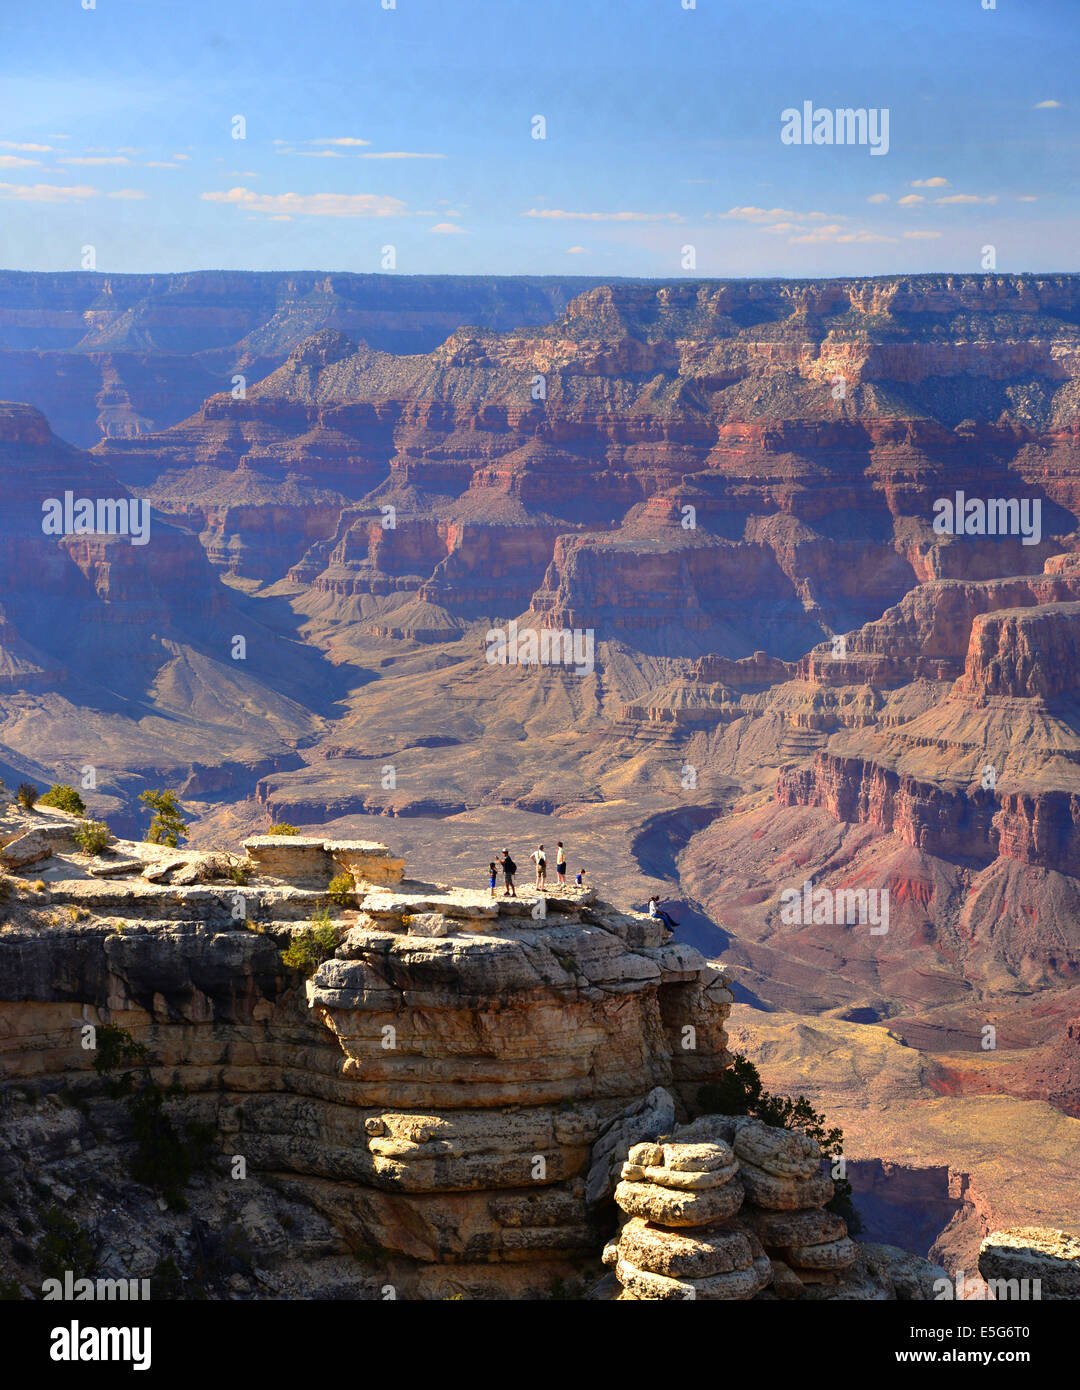 The immense size of the canyon is underlined by the seemingly tiny human figures against the background of the canyon view. Stock Photo